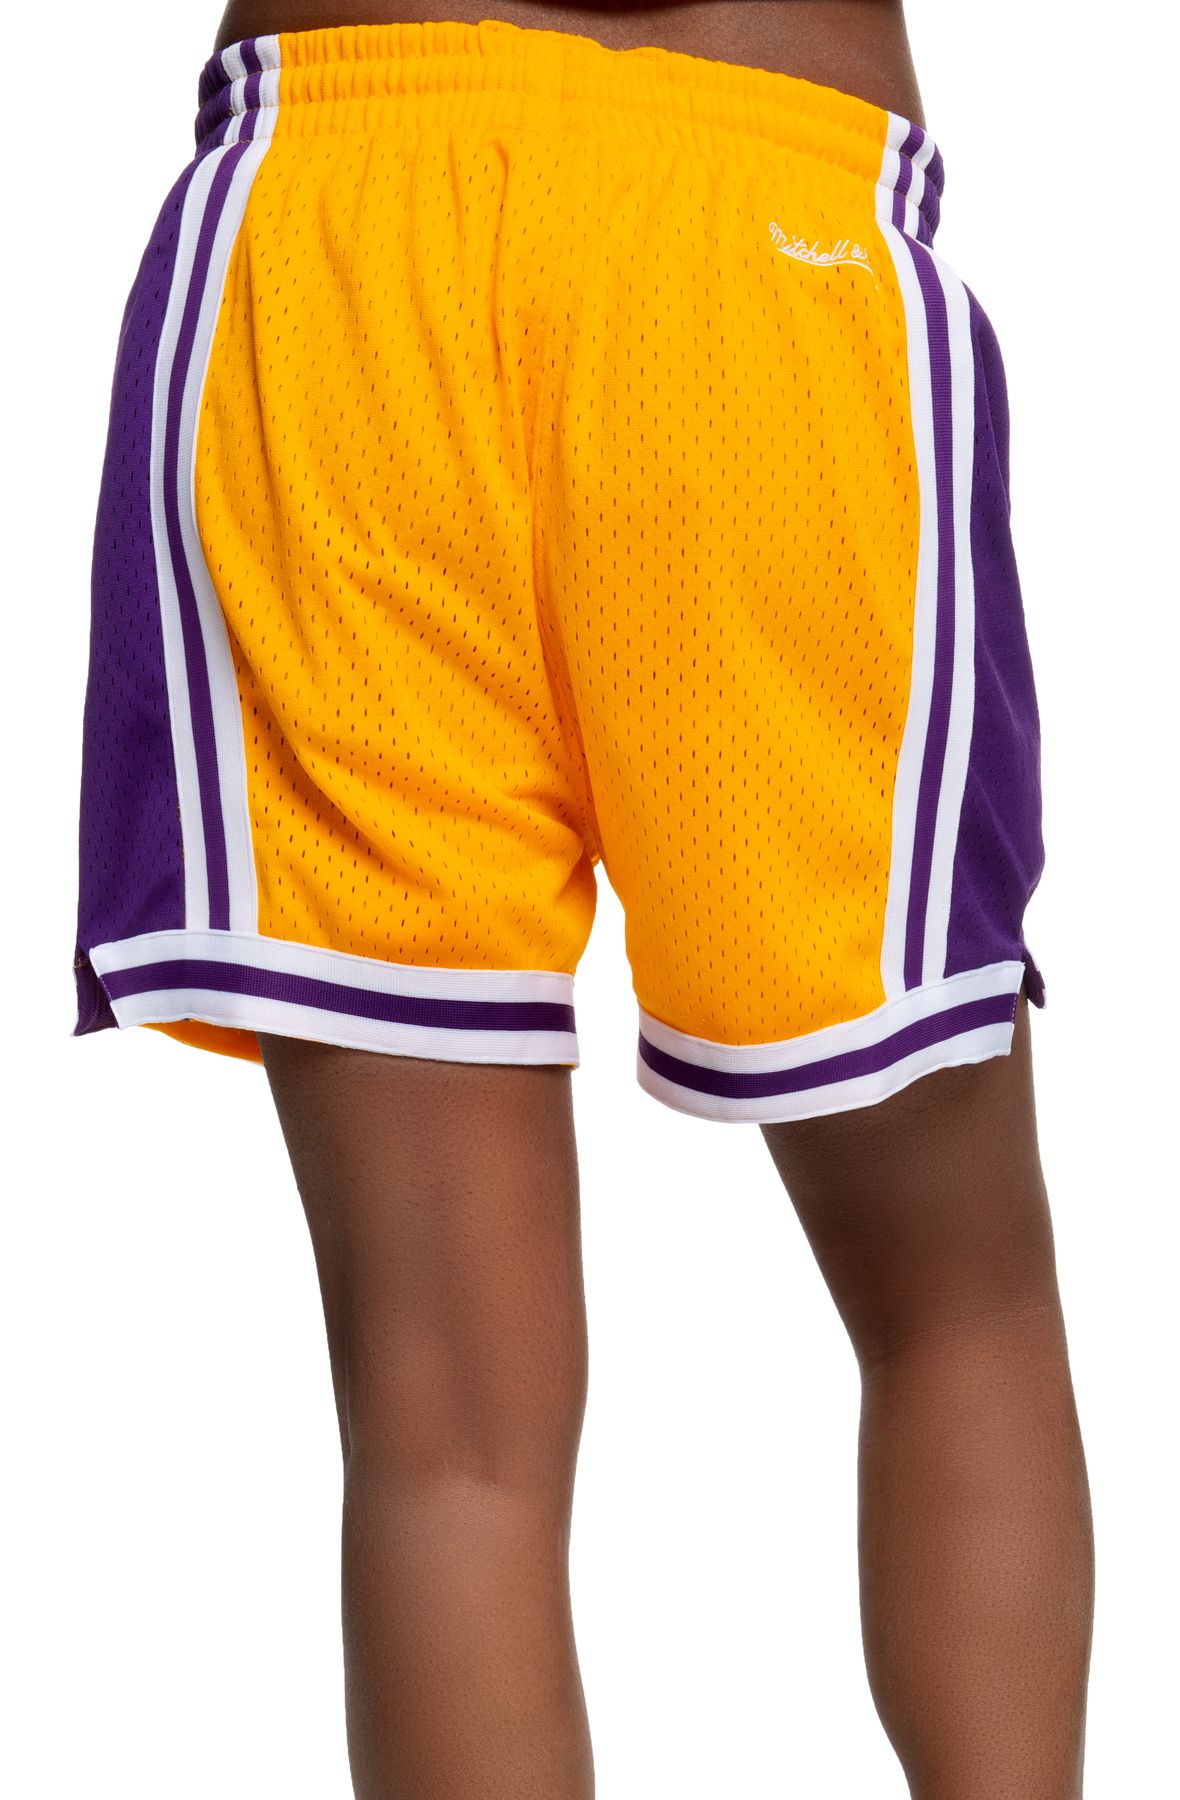 Women's Mitchell & Ness Black Los Angeles Lakers Big Face 4.0 Mesh Shorts